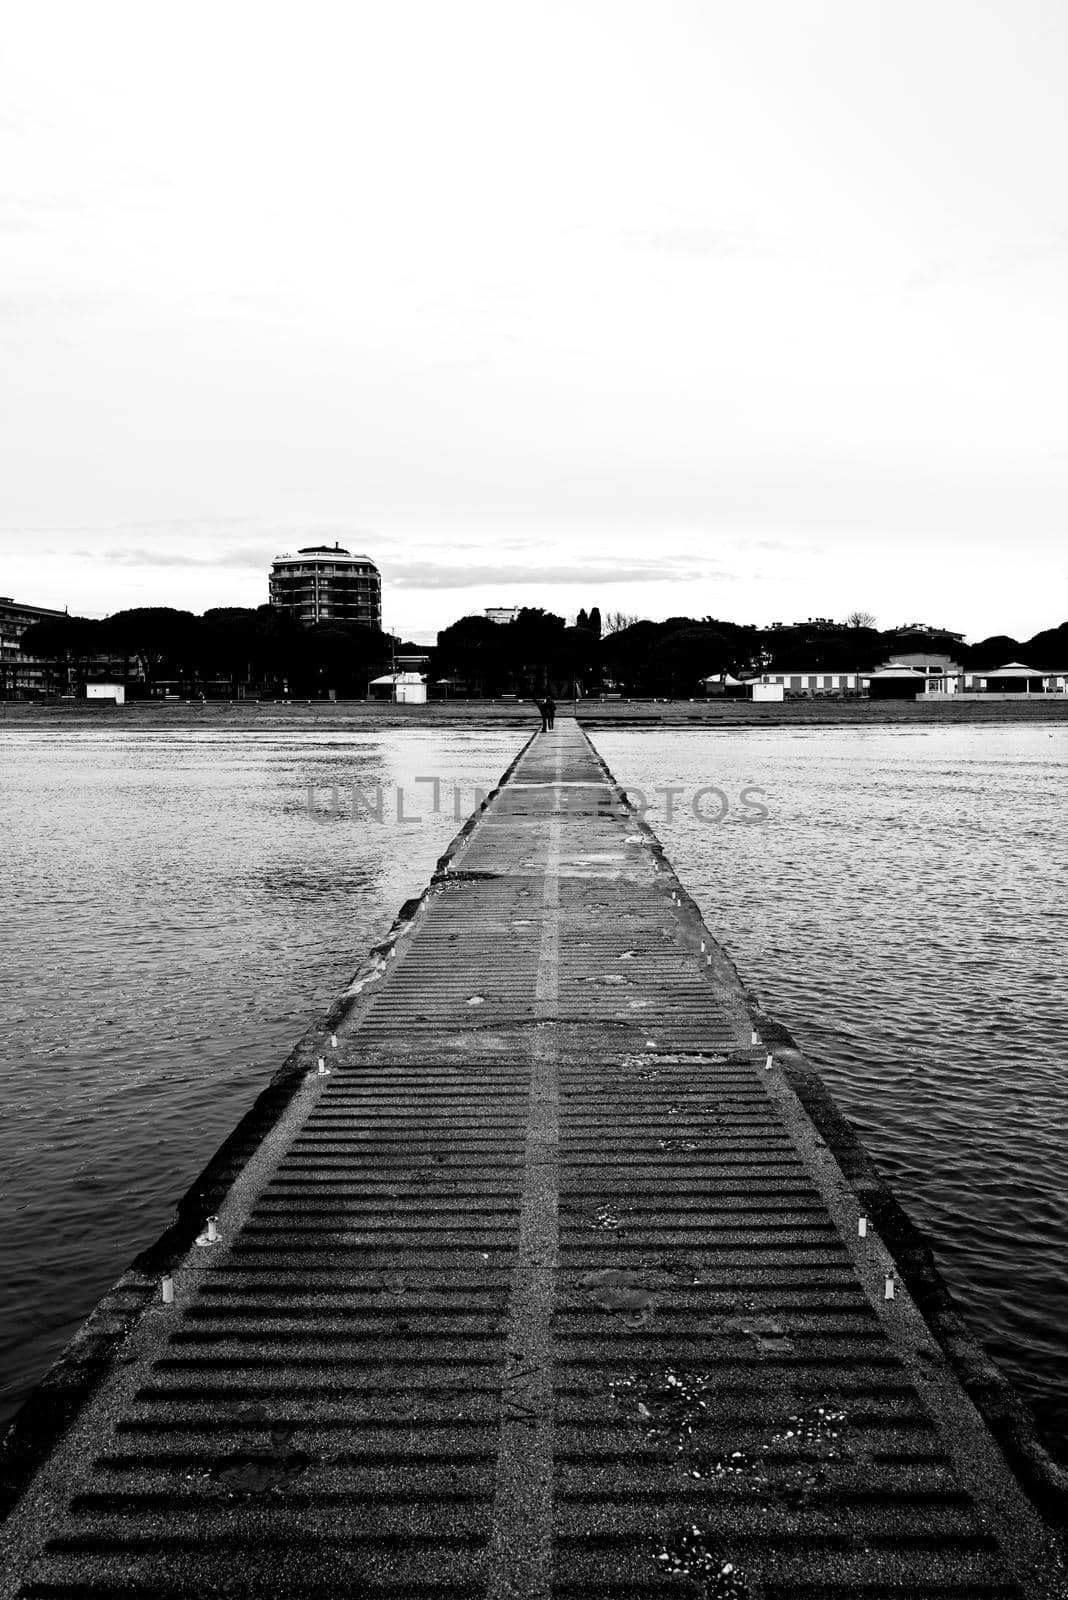 Monochrome shot of an old concrete jetty leading to the shore.